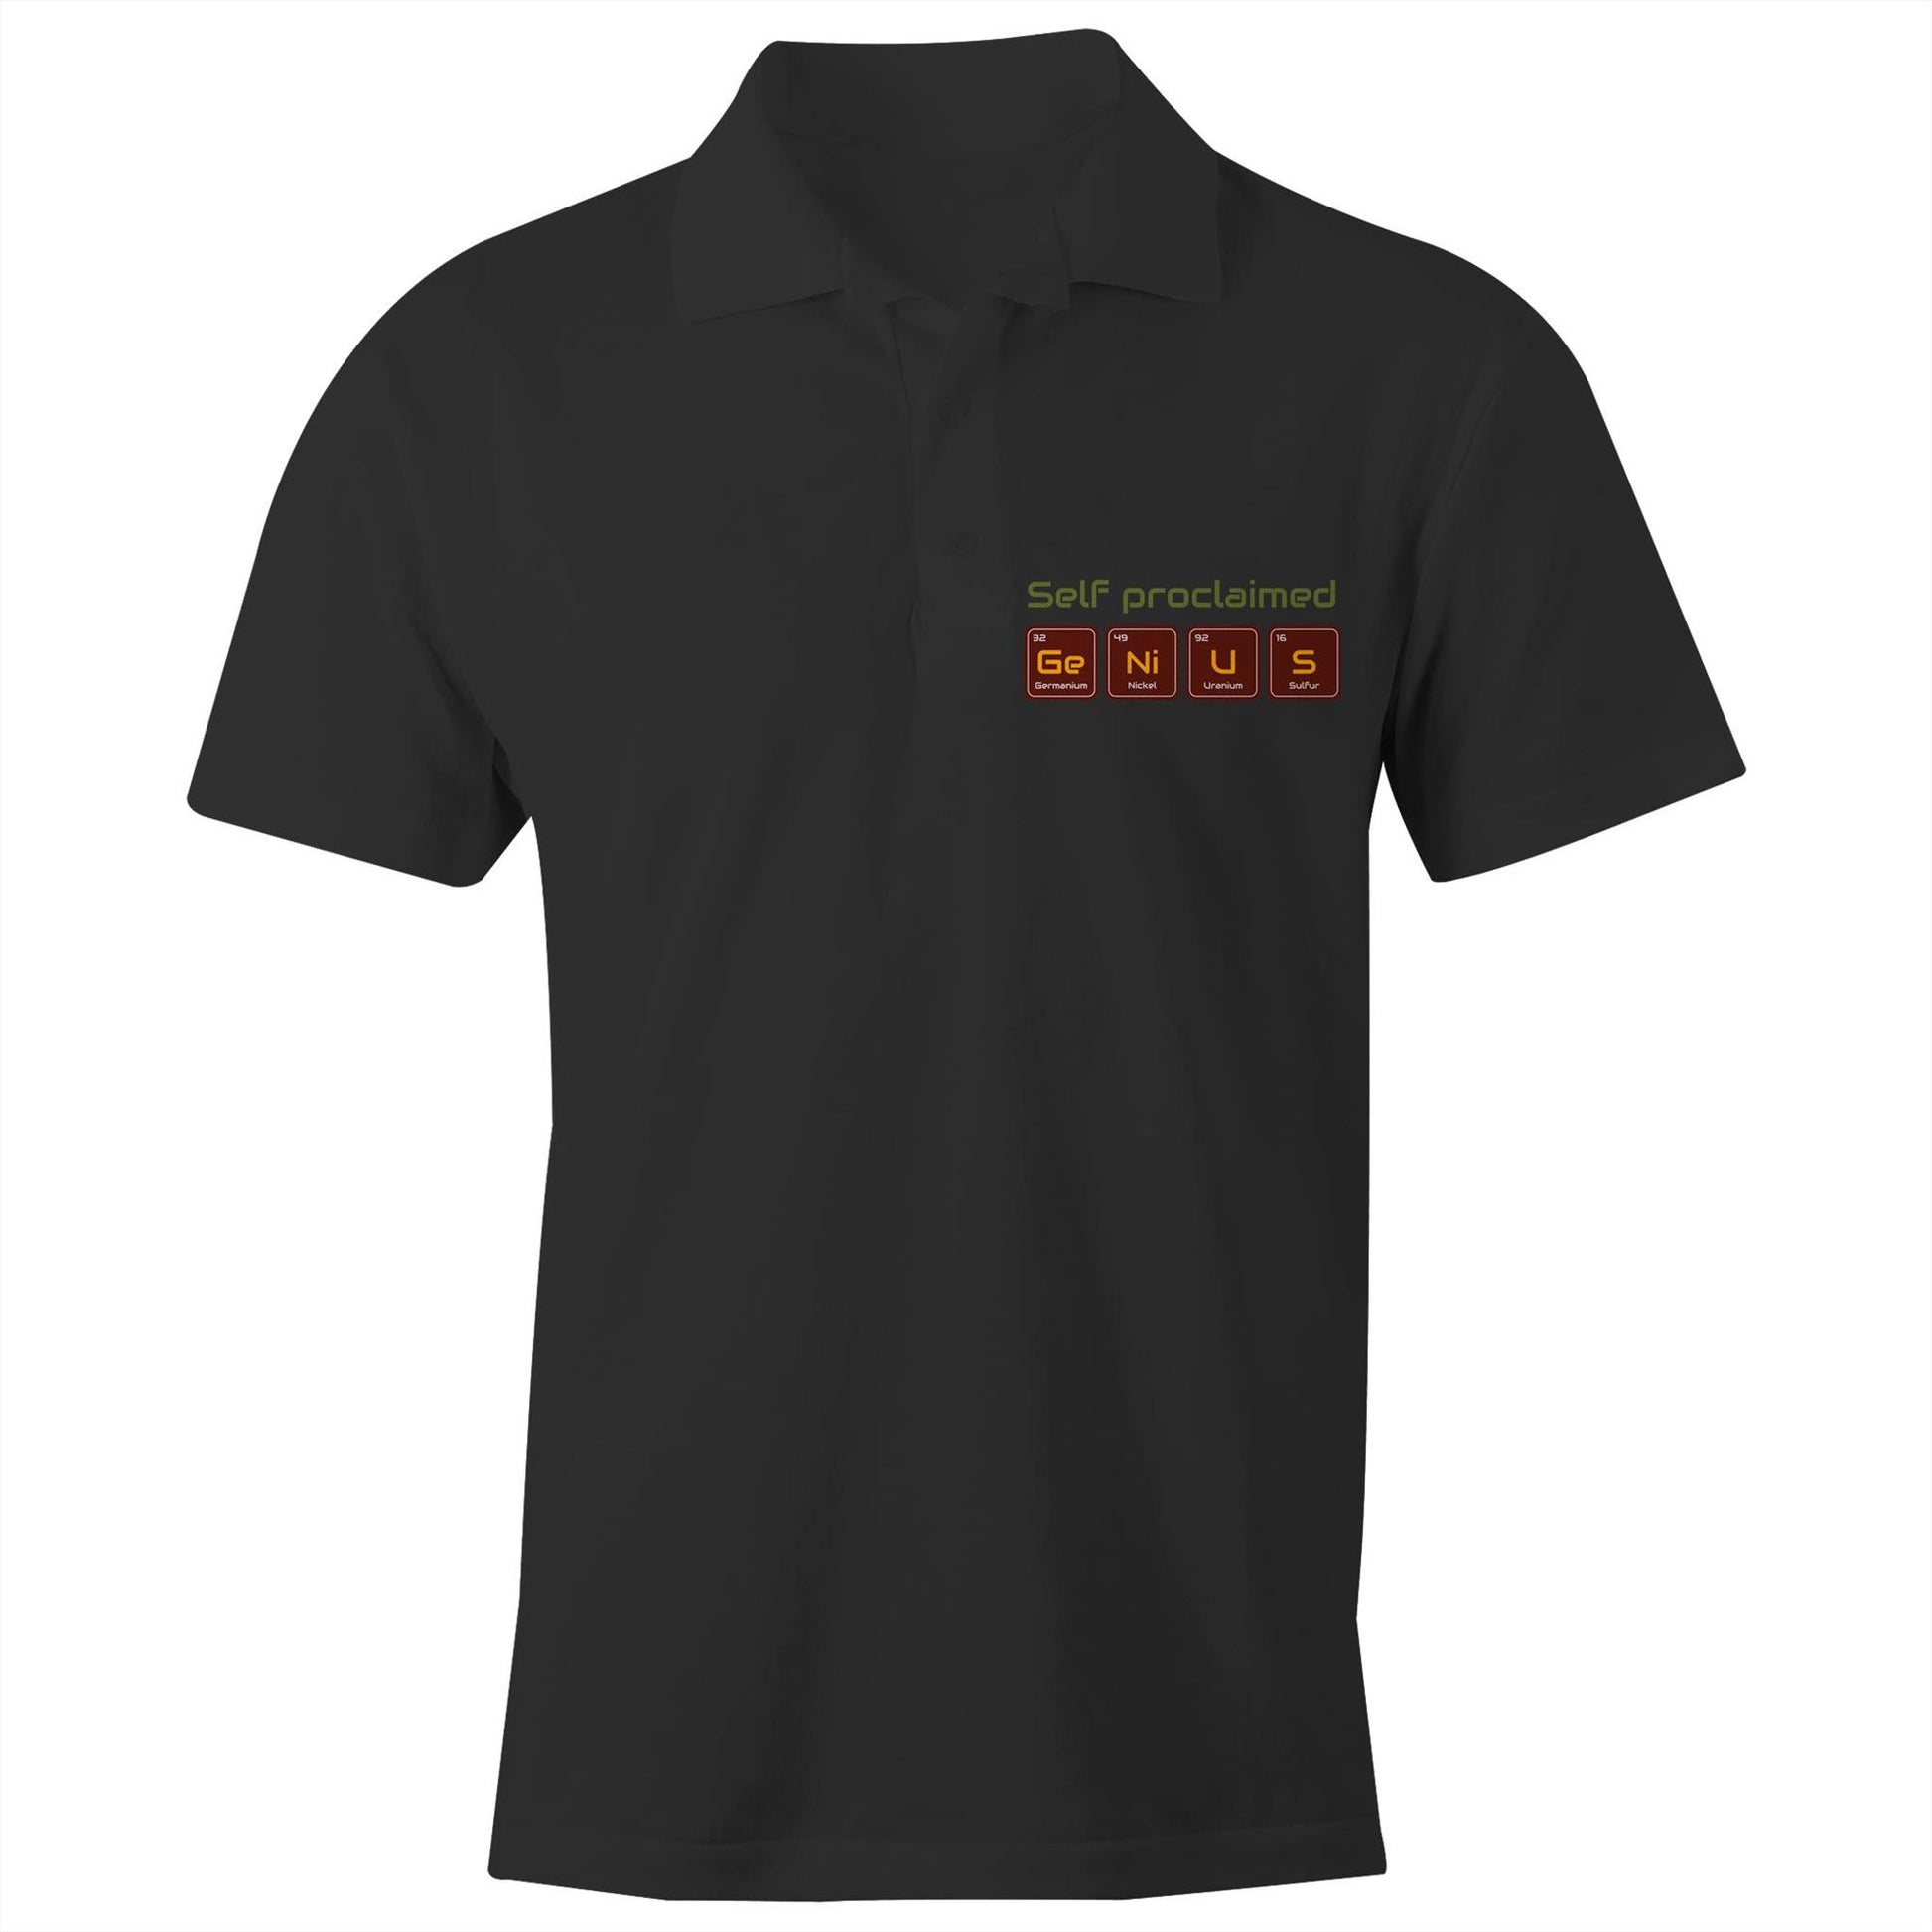 Self Proclaimed Genius, Periodic Table Of Elements - Chad S/S Polo Shirt, Printed Black Polo Shirt Funny Science